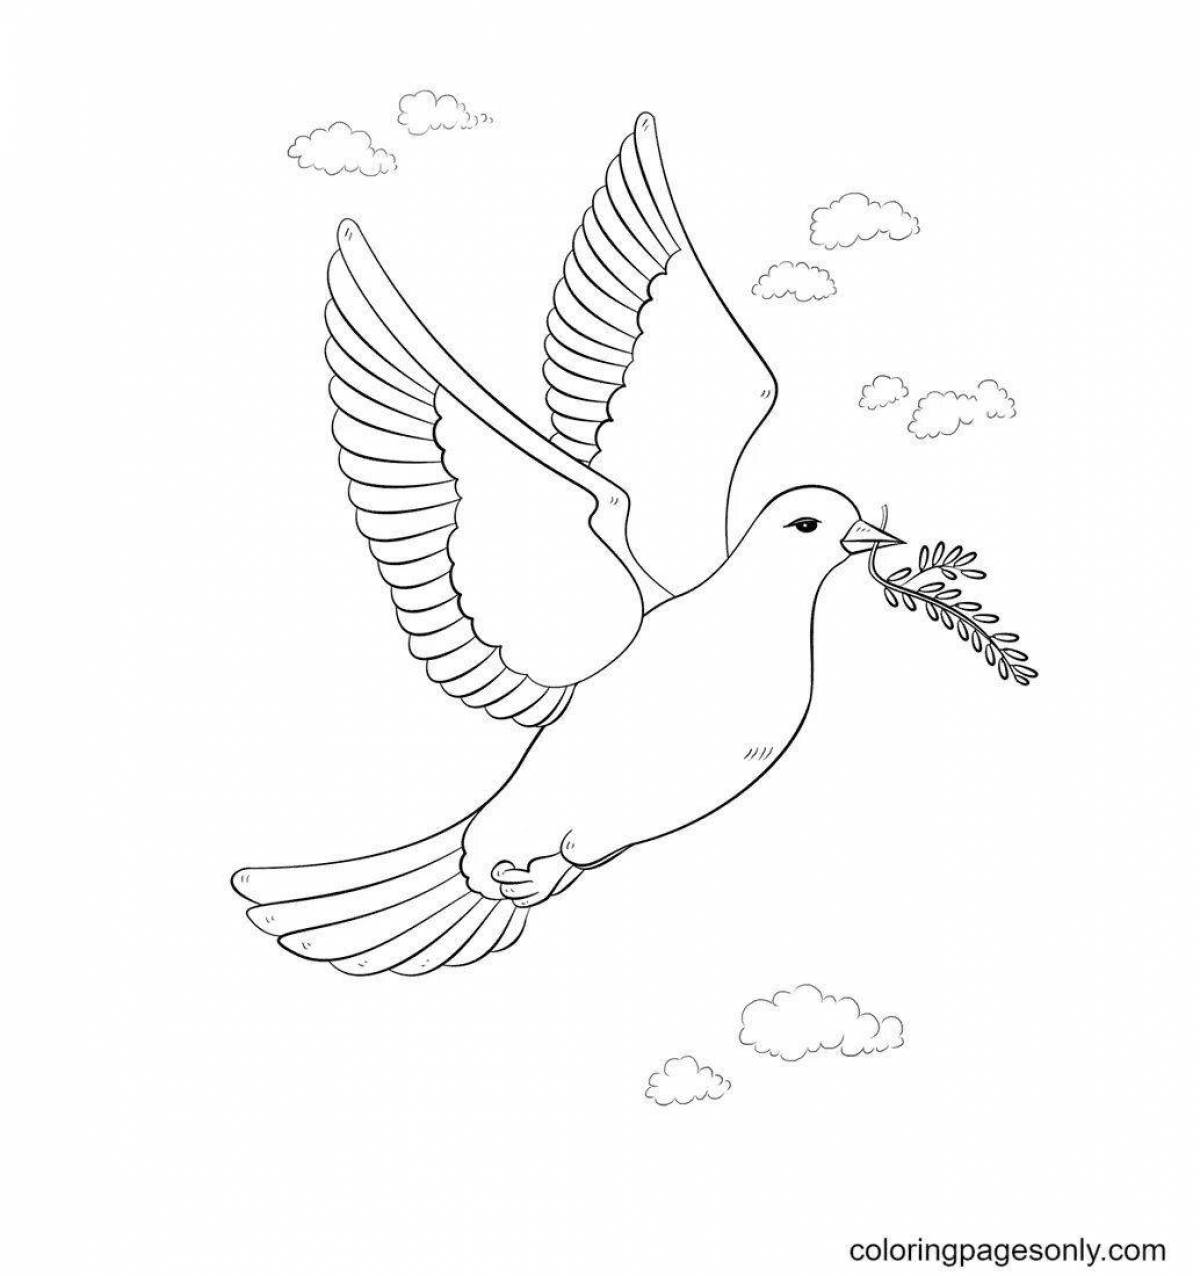 Coloring book glowing flying dove